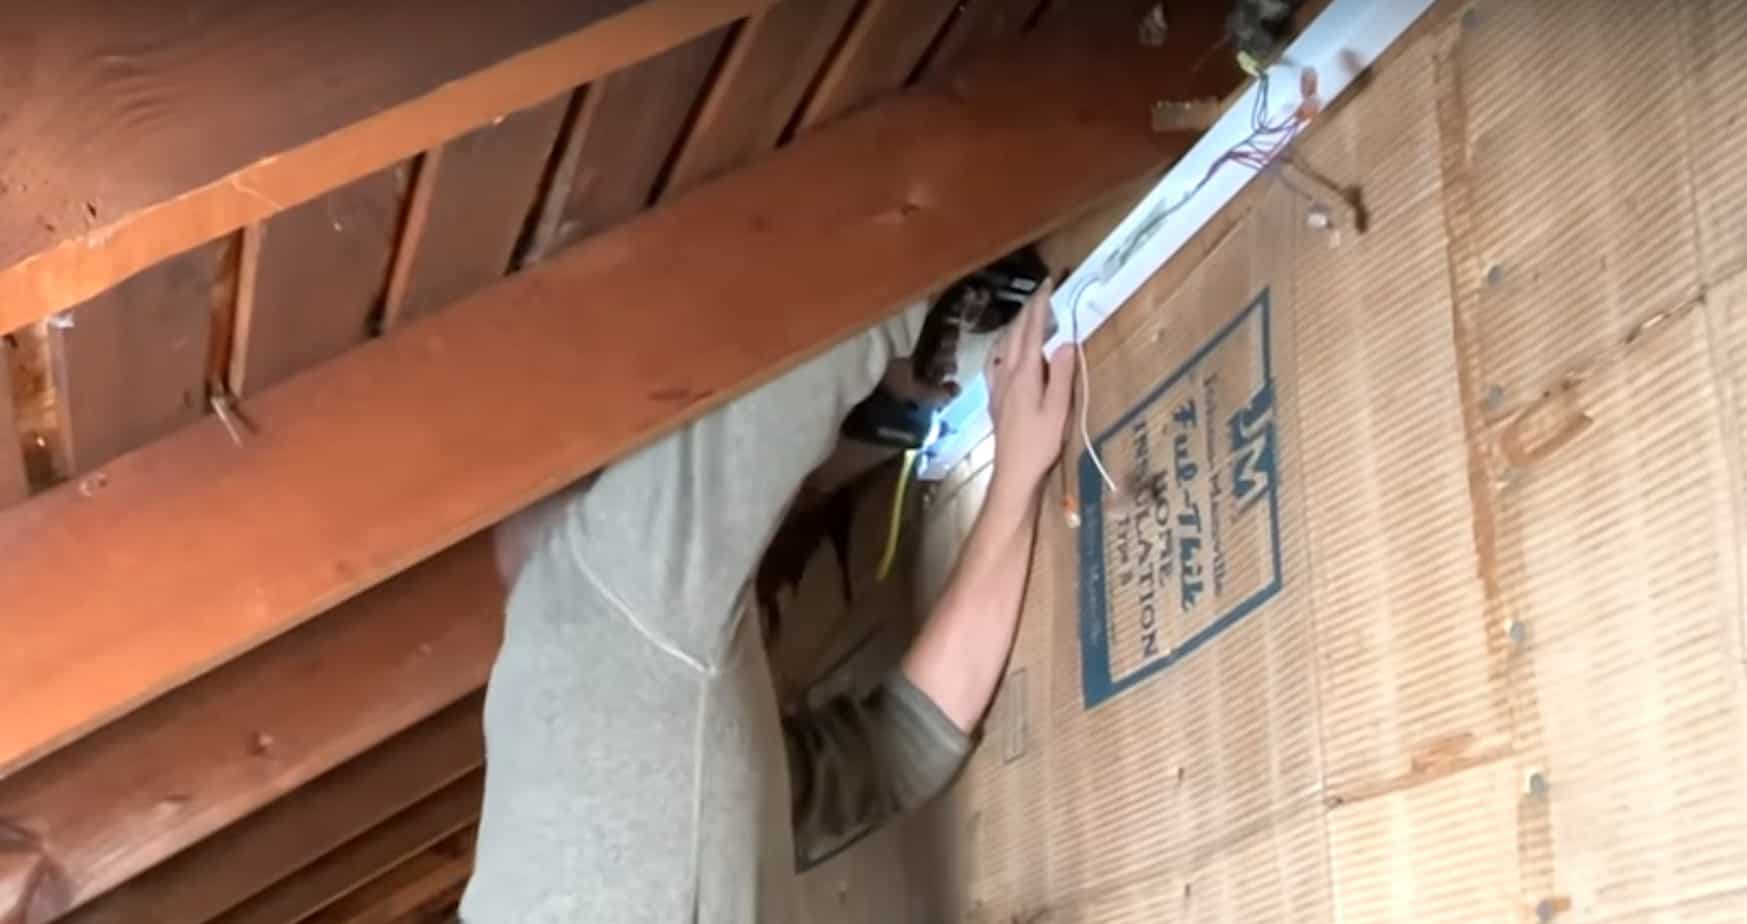 Mounting the housing of the first light fixture to studs